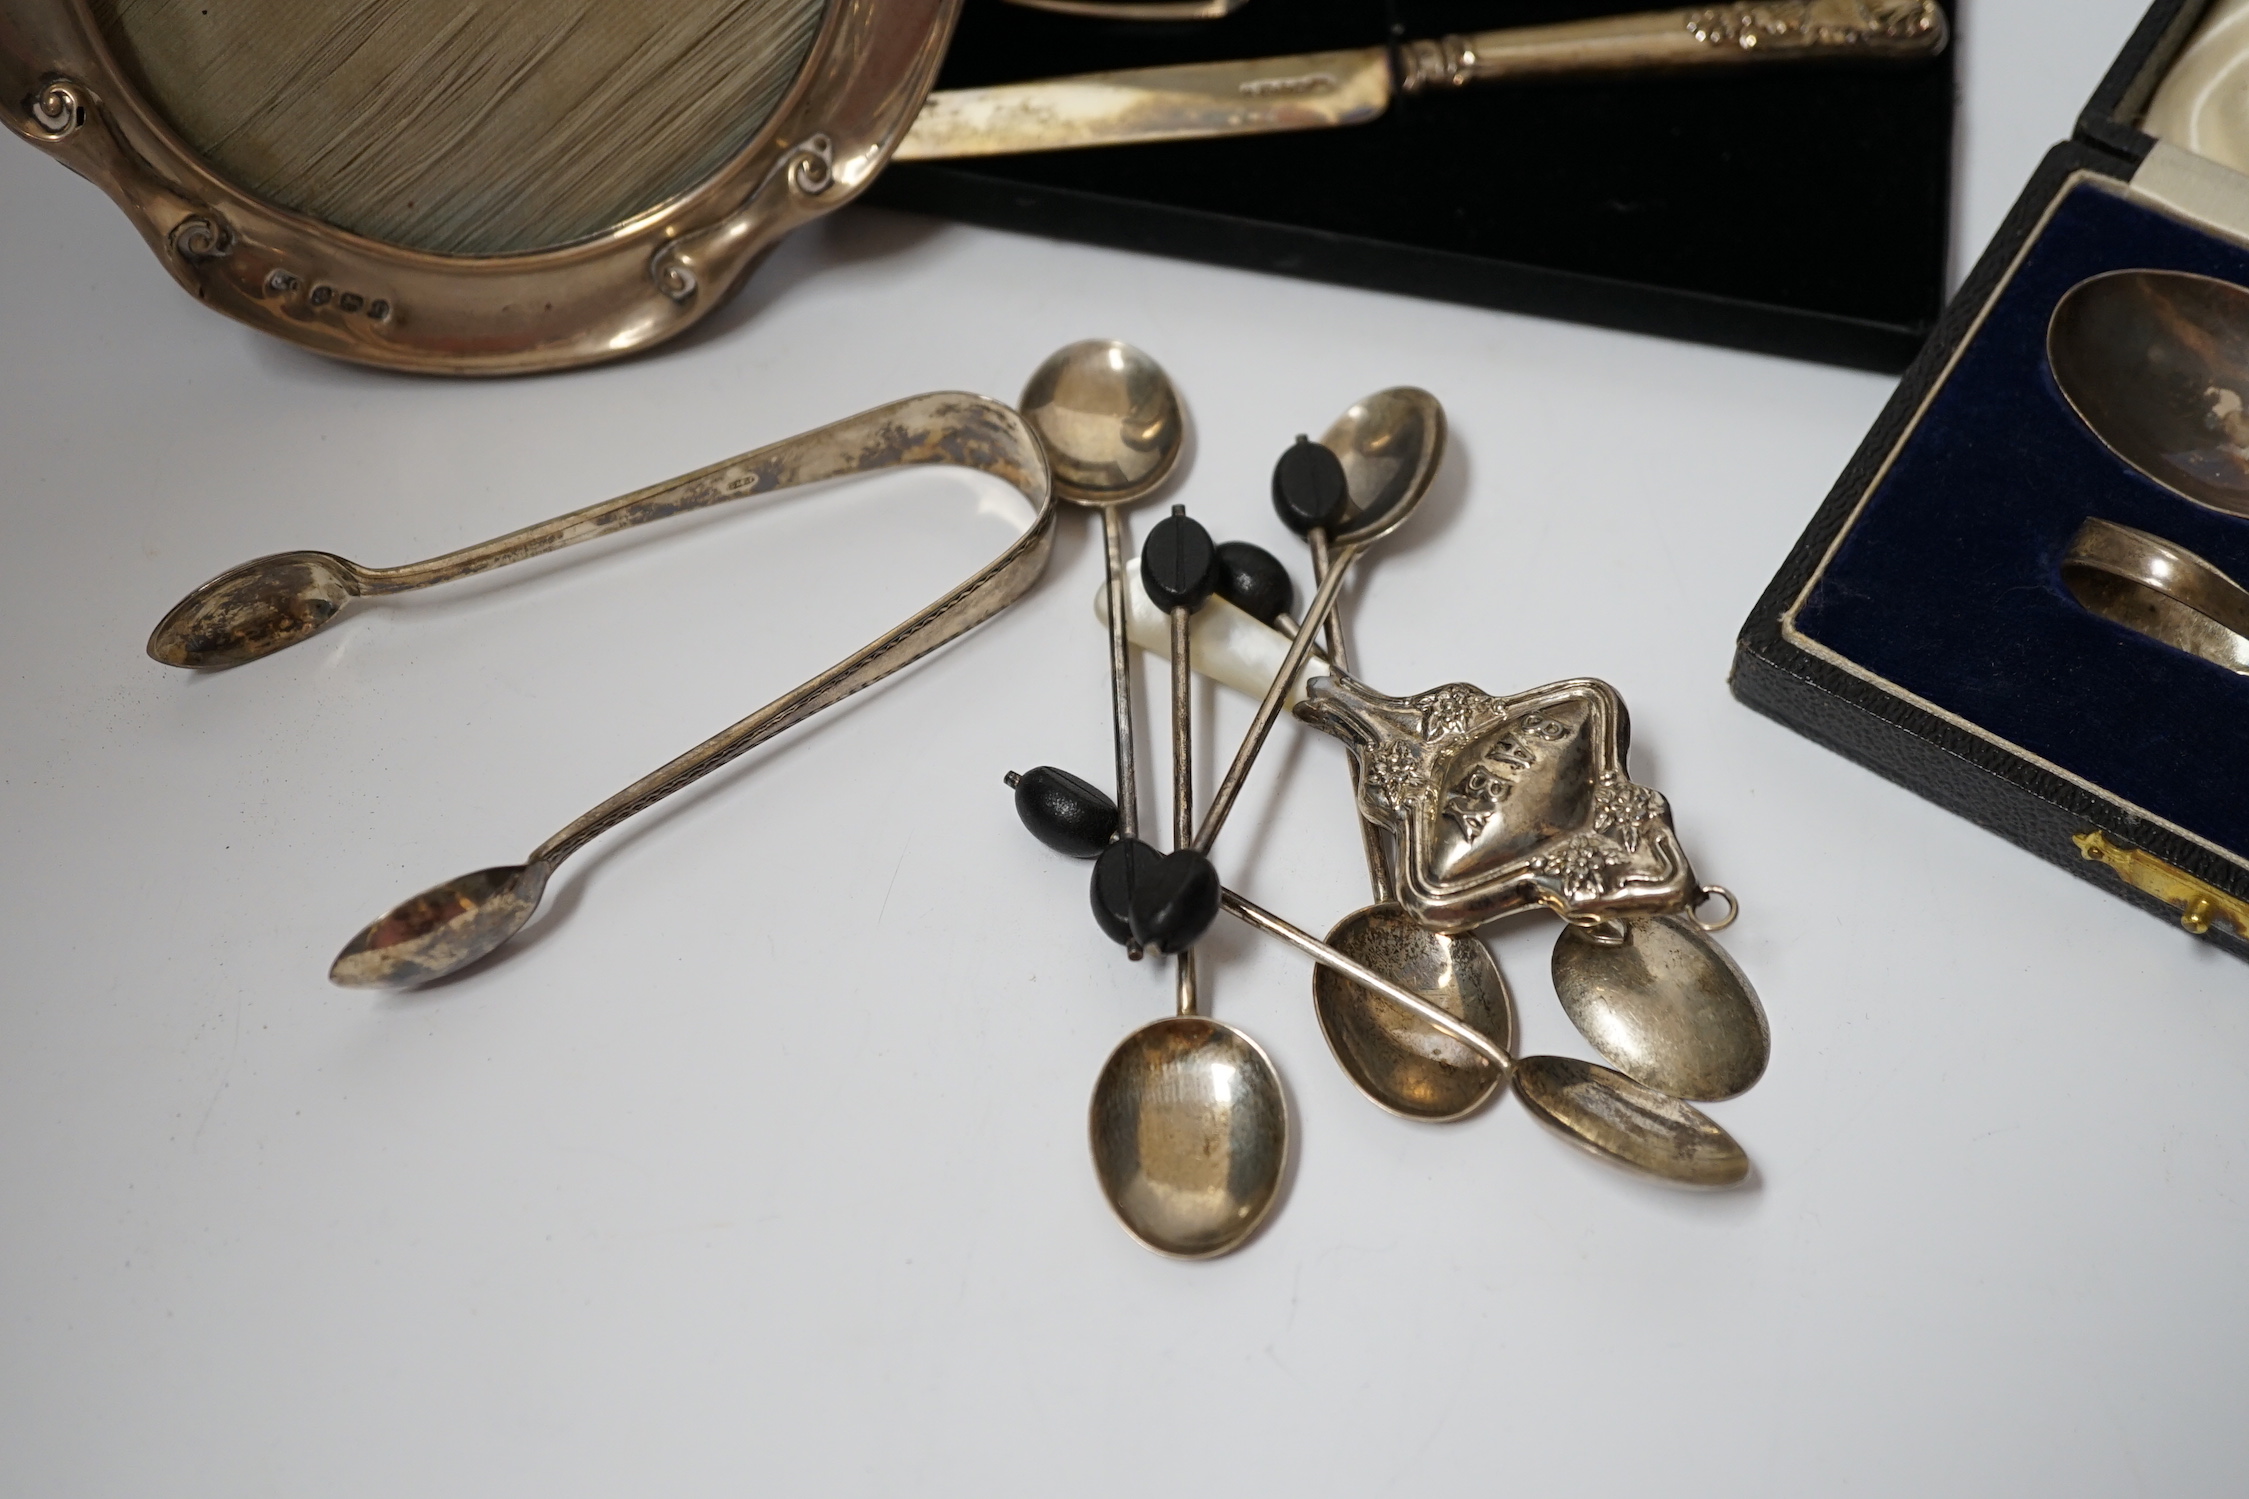 A cased silver christening spoon & pusher, a Georgian silver christening knife and fork, six silver bean end coffee spoons, a child's silver rattle, silver sugar tongs and a silver mounted photograph frame, Birmingham, 1